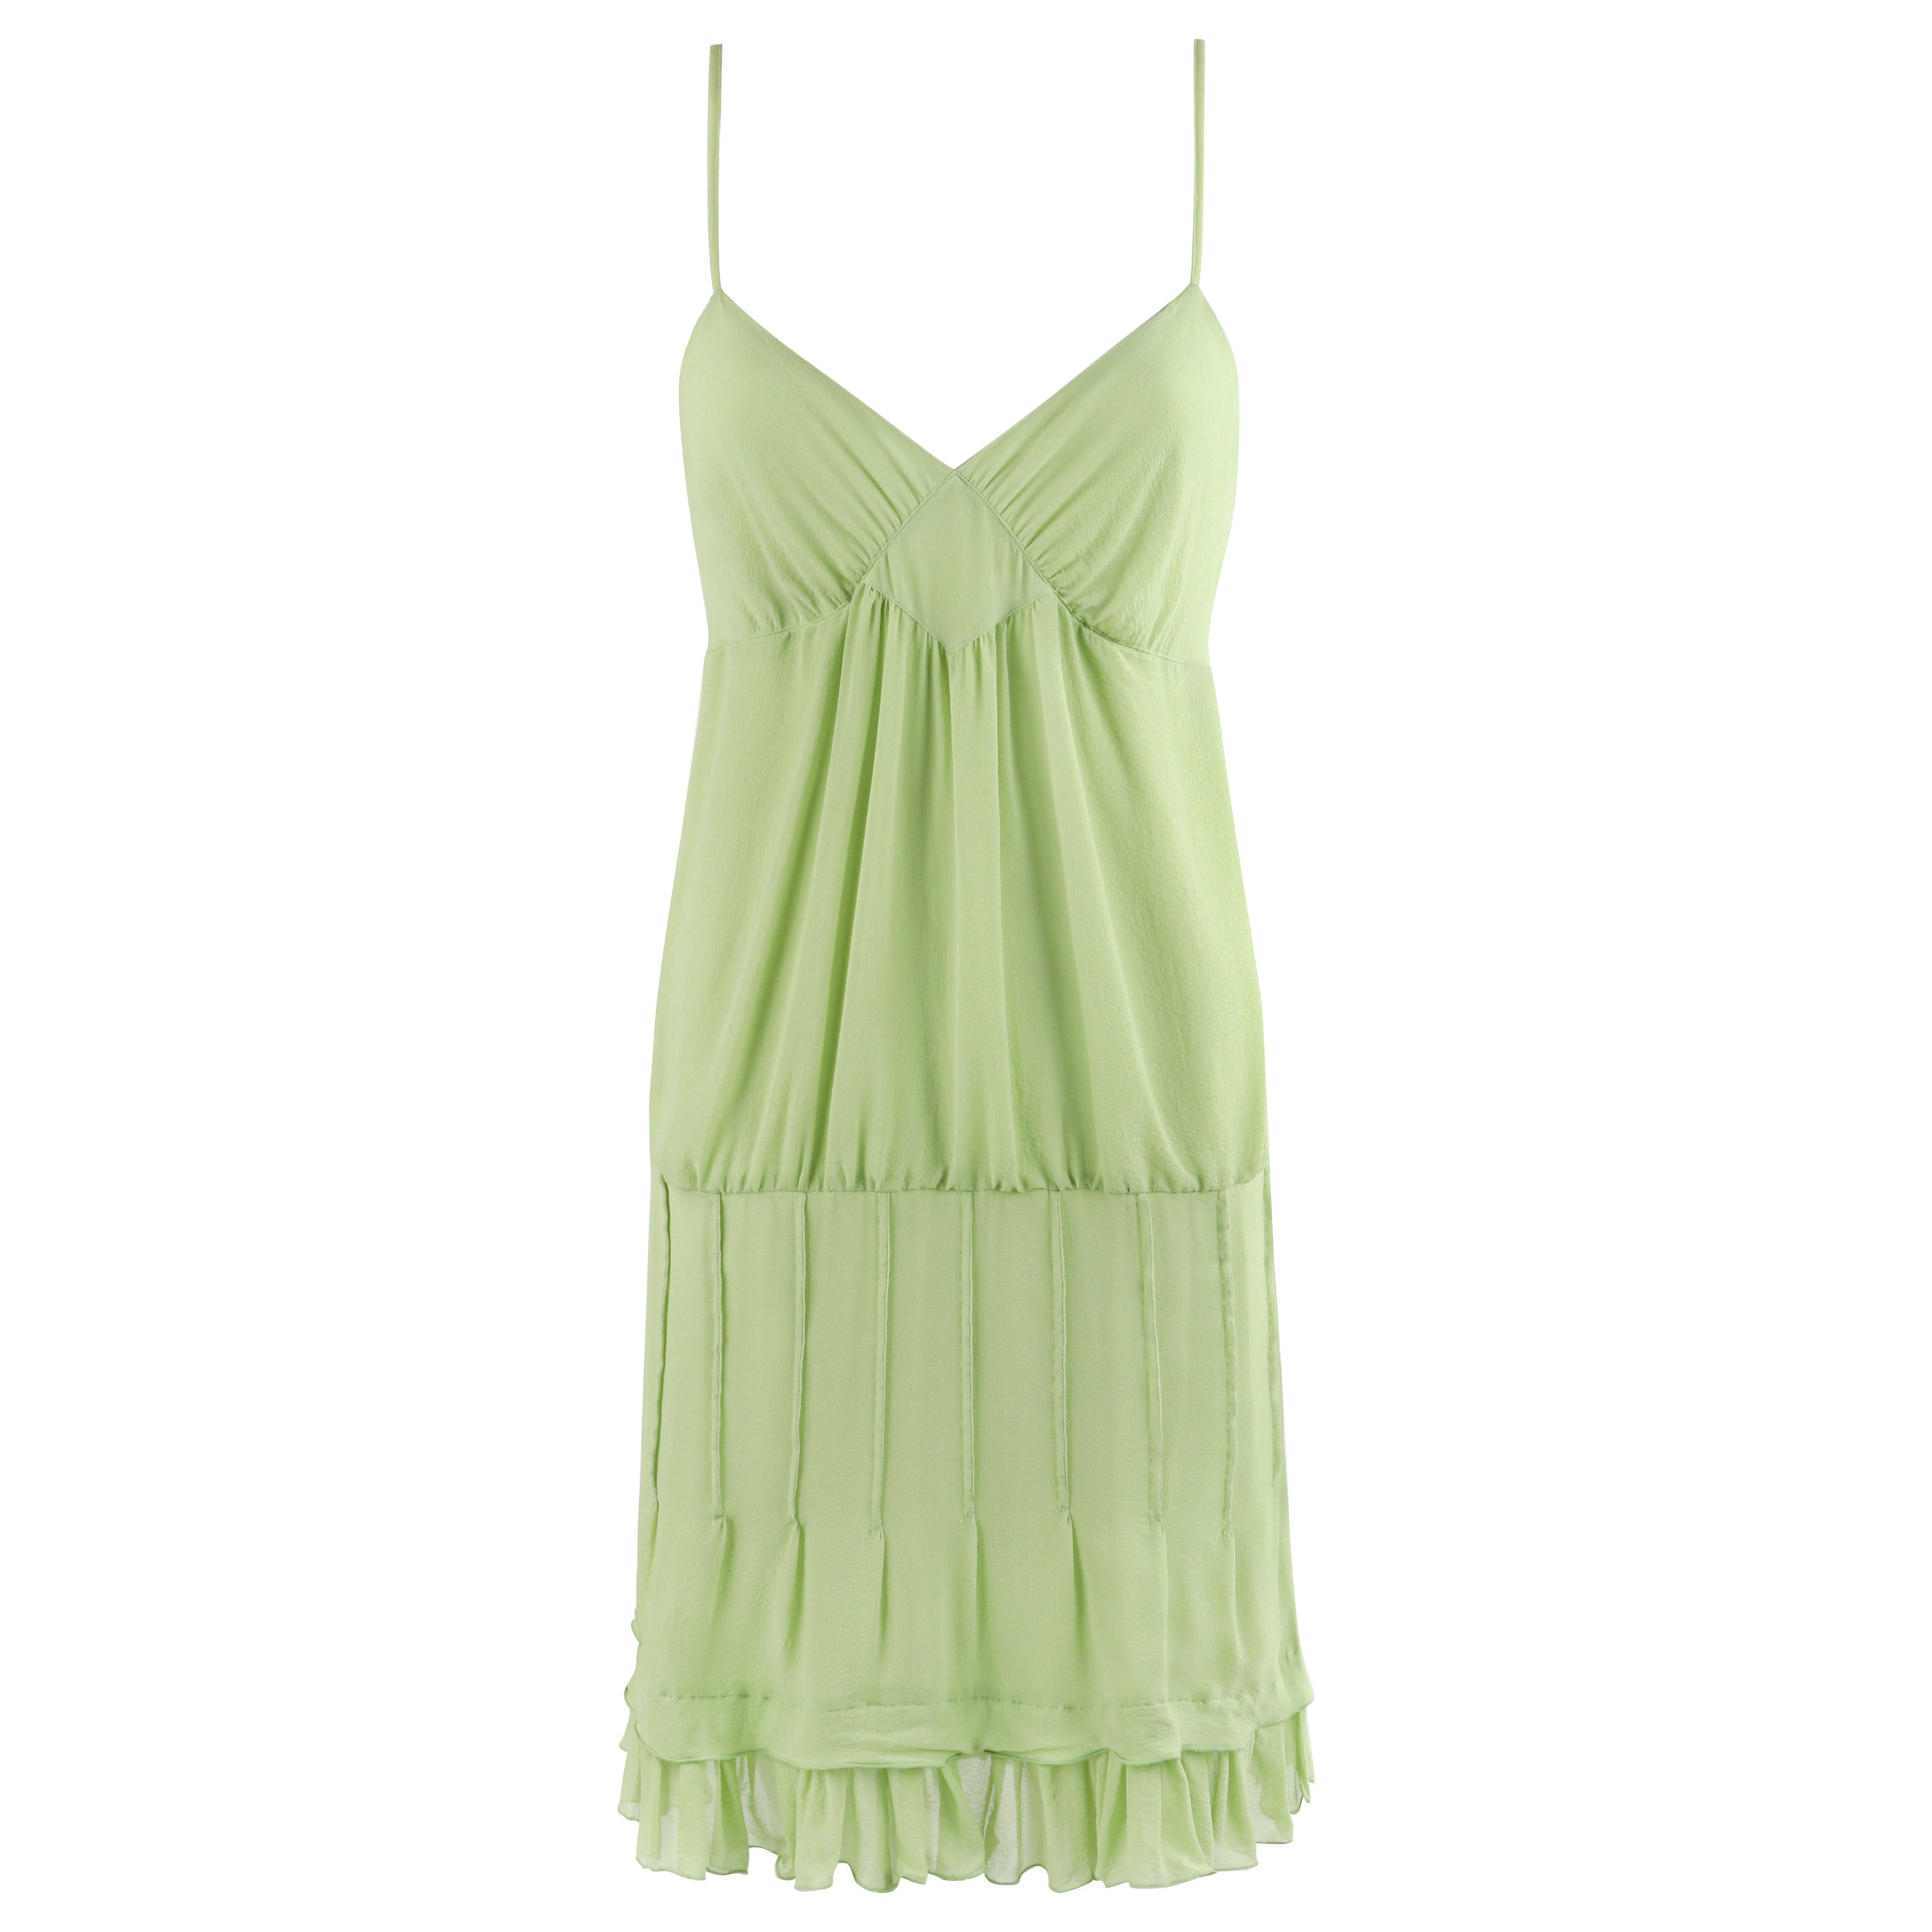 ALEXANDER MCQUEEN S/S 1996 Chartreuse Ruffled Tiered V-neck Pleated ...